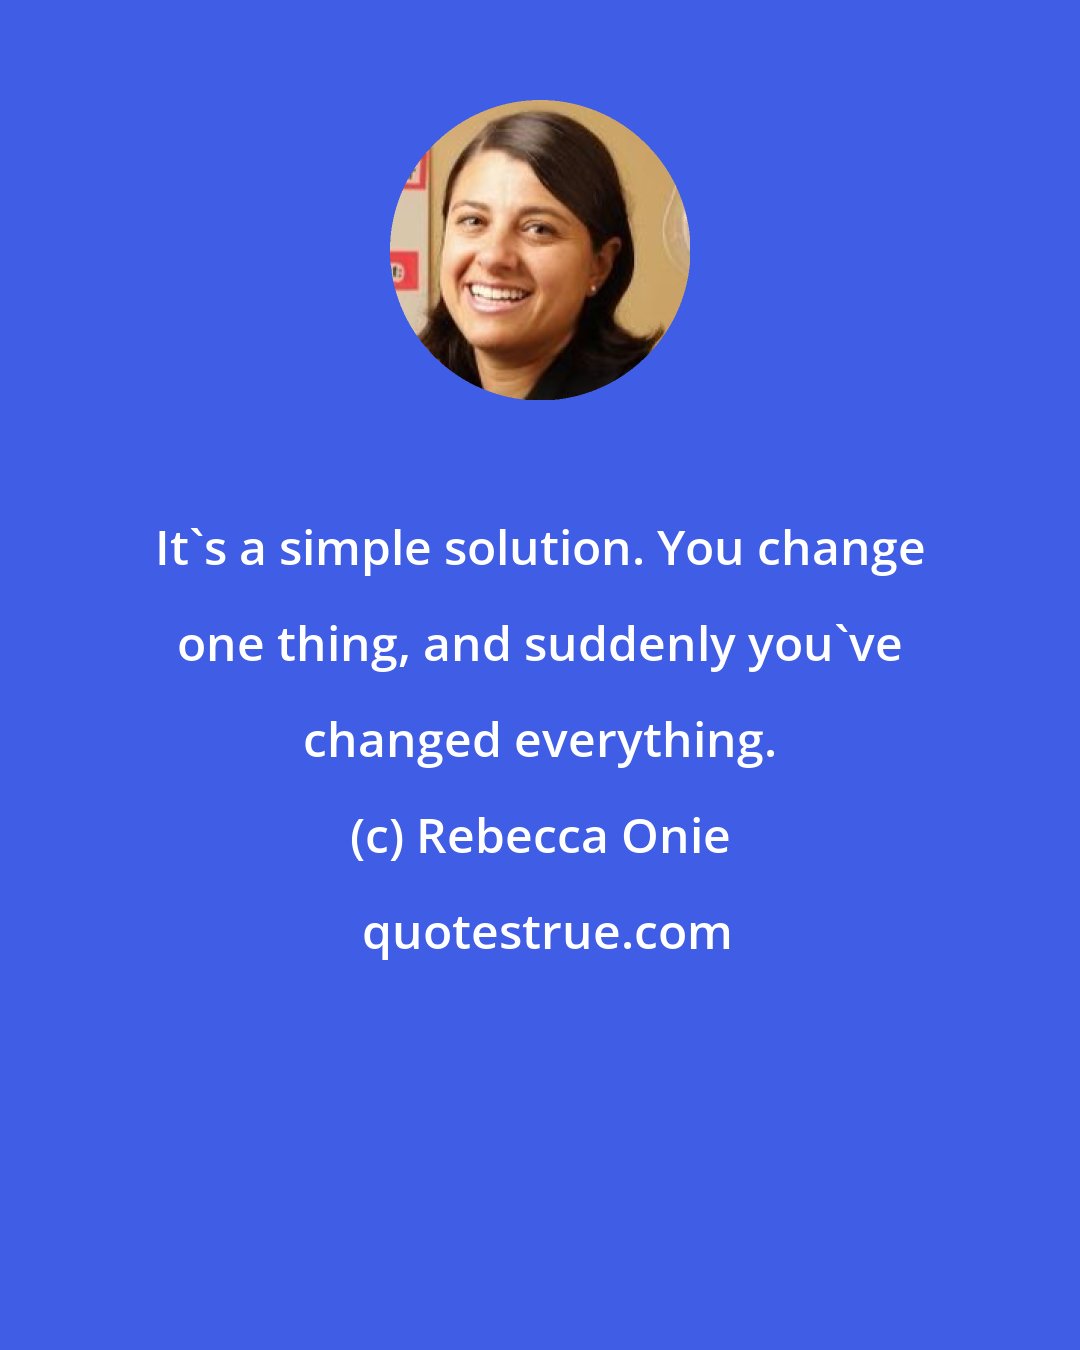 Rebecca Onie: It's a simple solution. You change one thing, and suddenly you've changed everything.